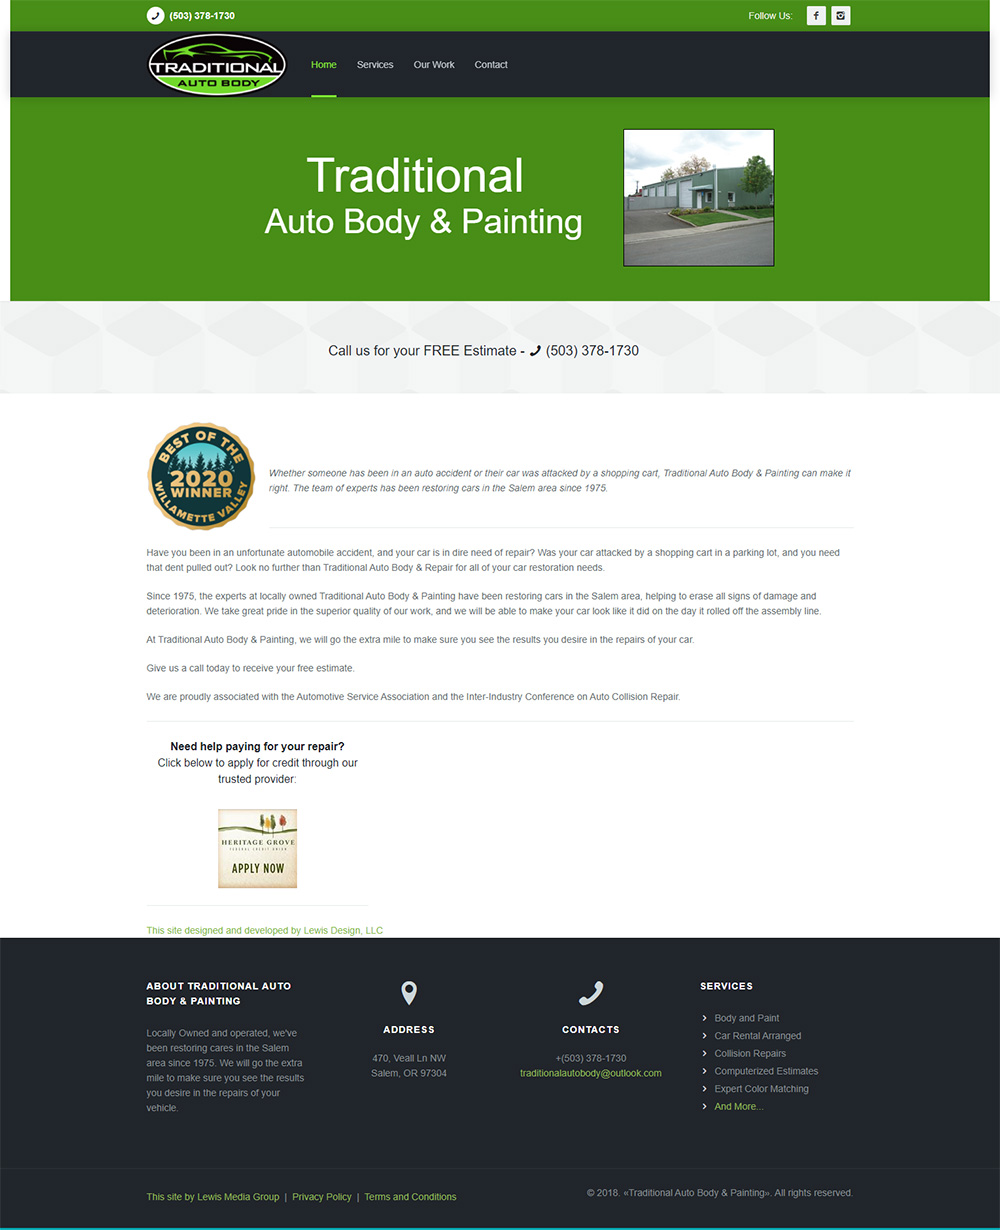 Traditional Auto Body Home page before redesign